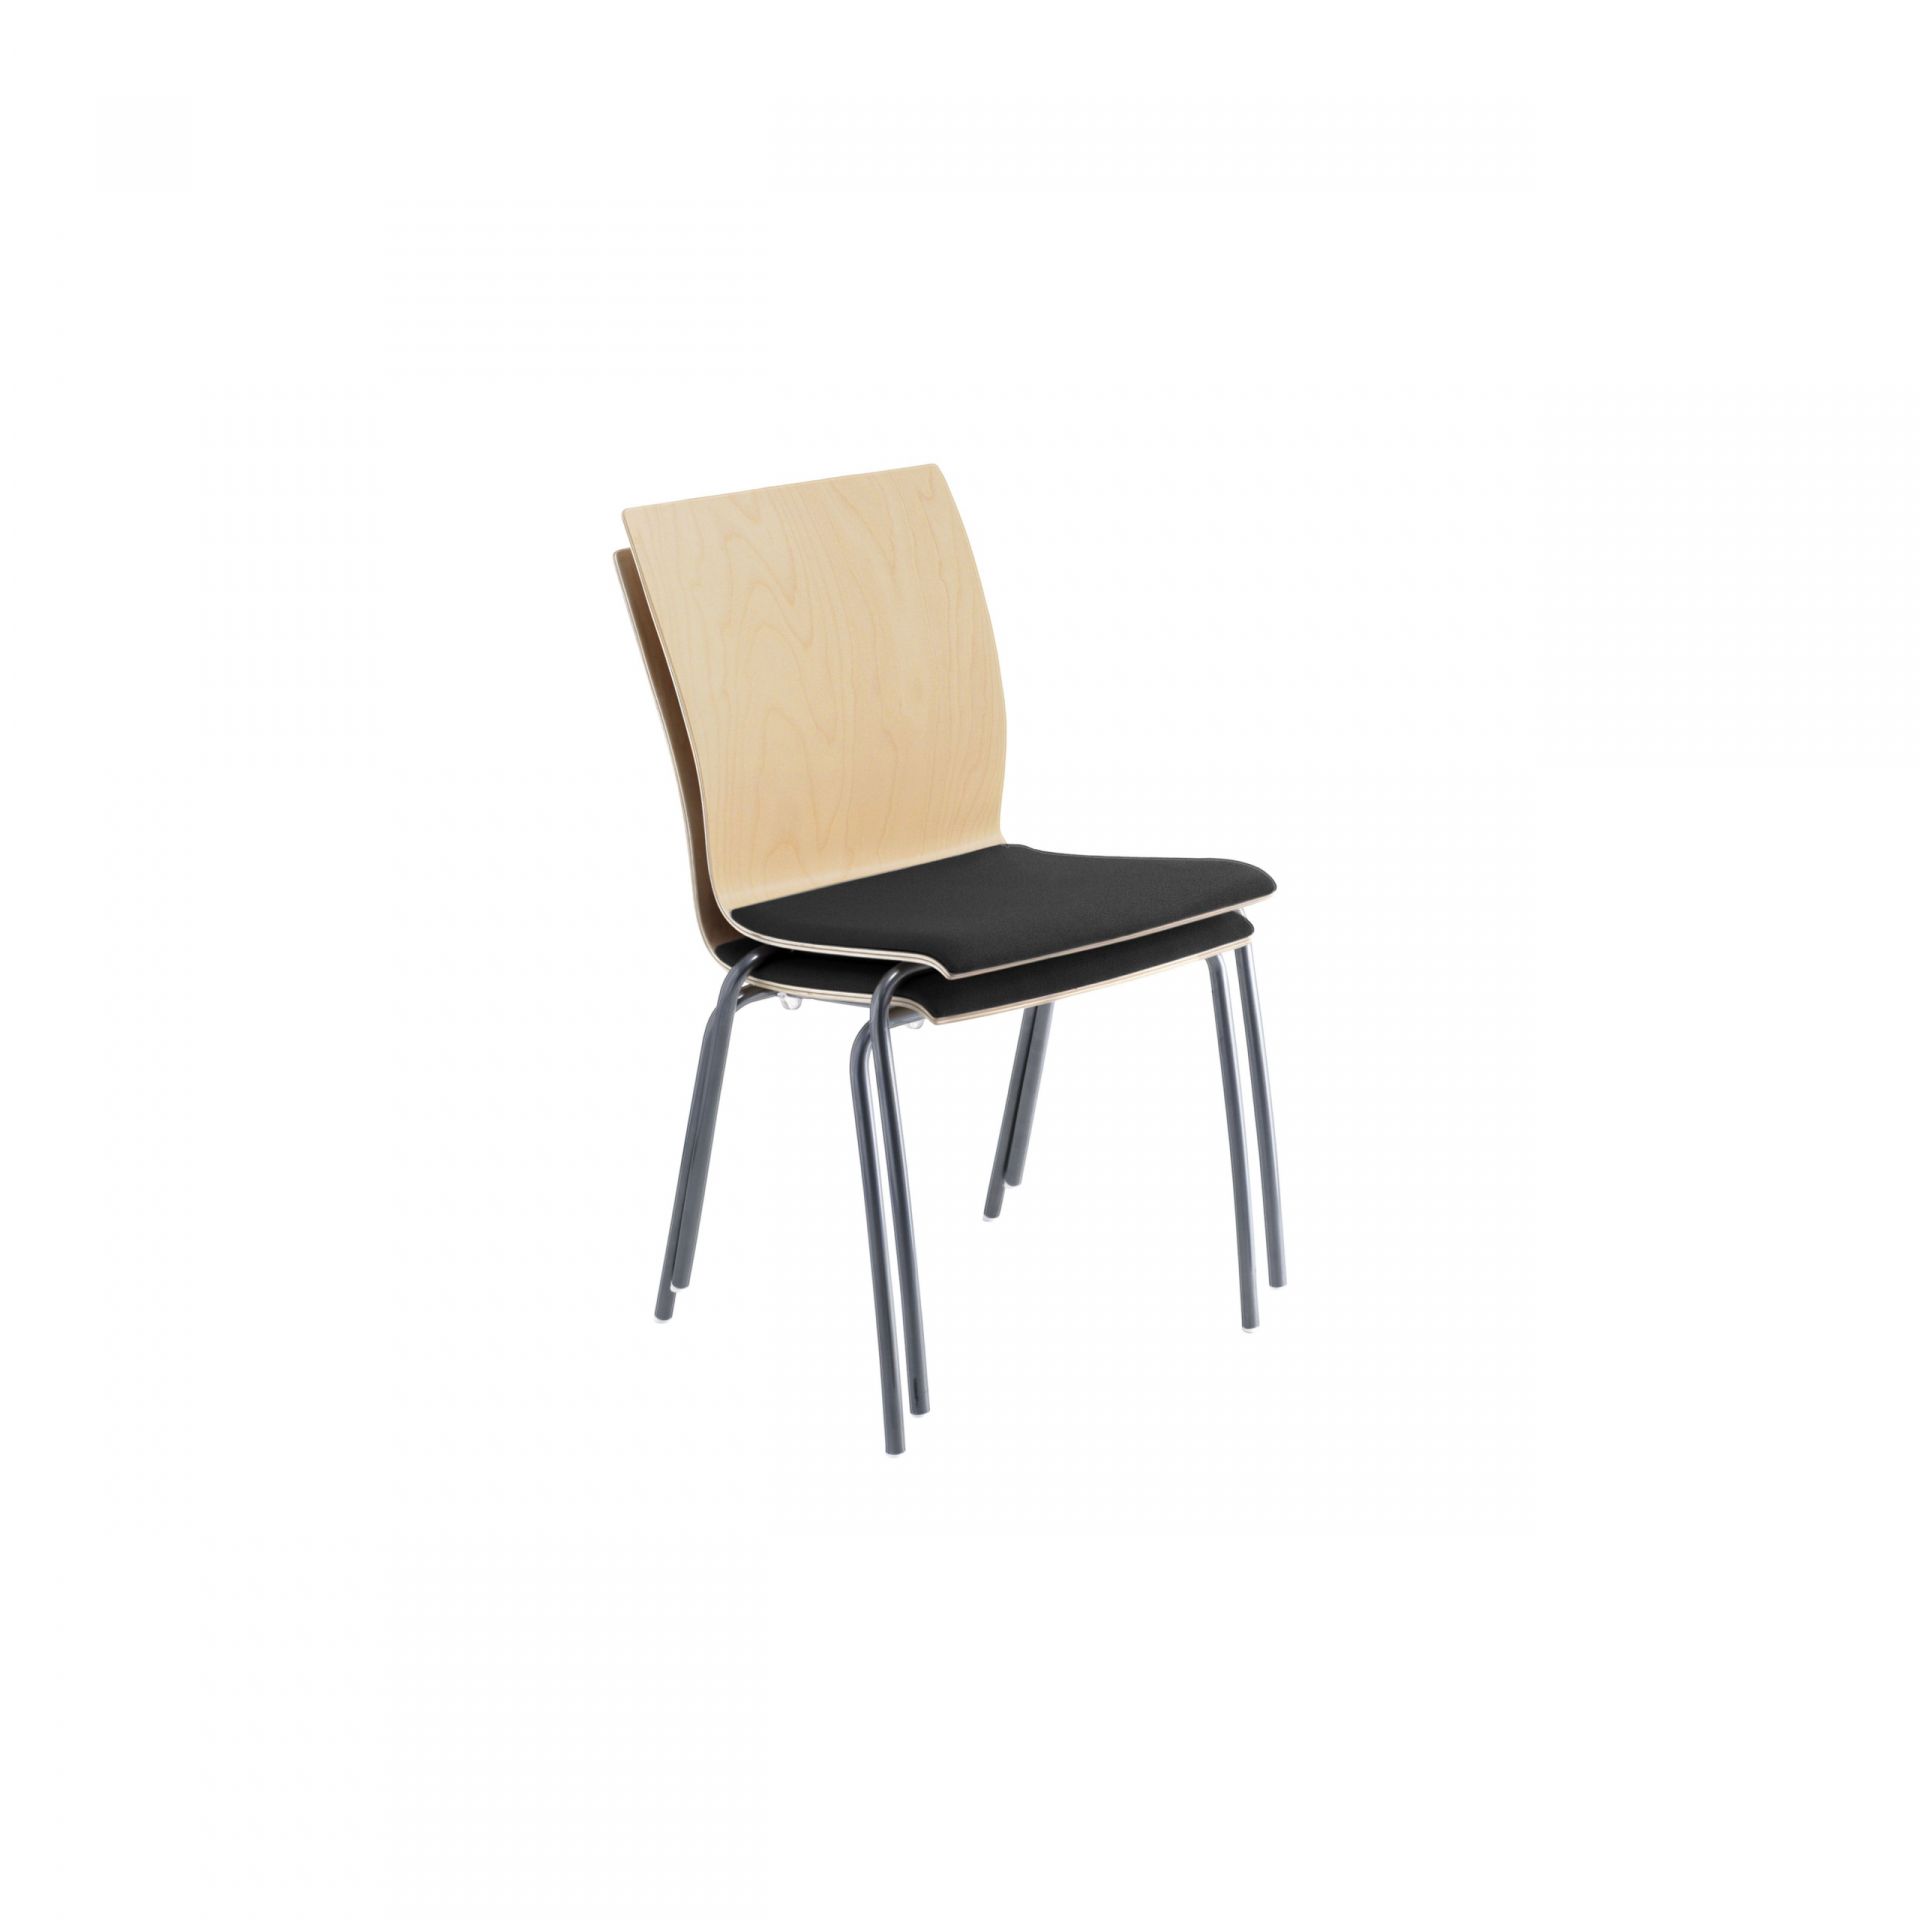 Sit Chair with metal legs product image 3